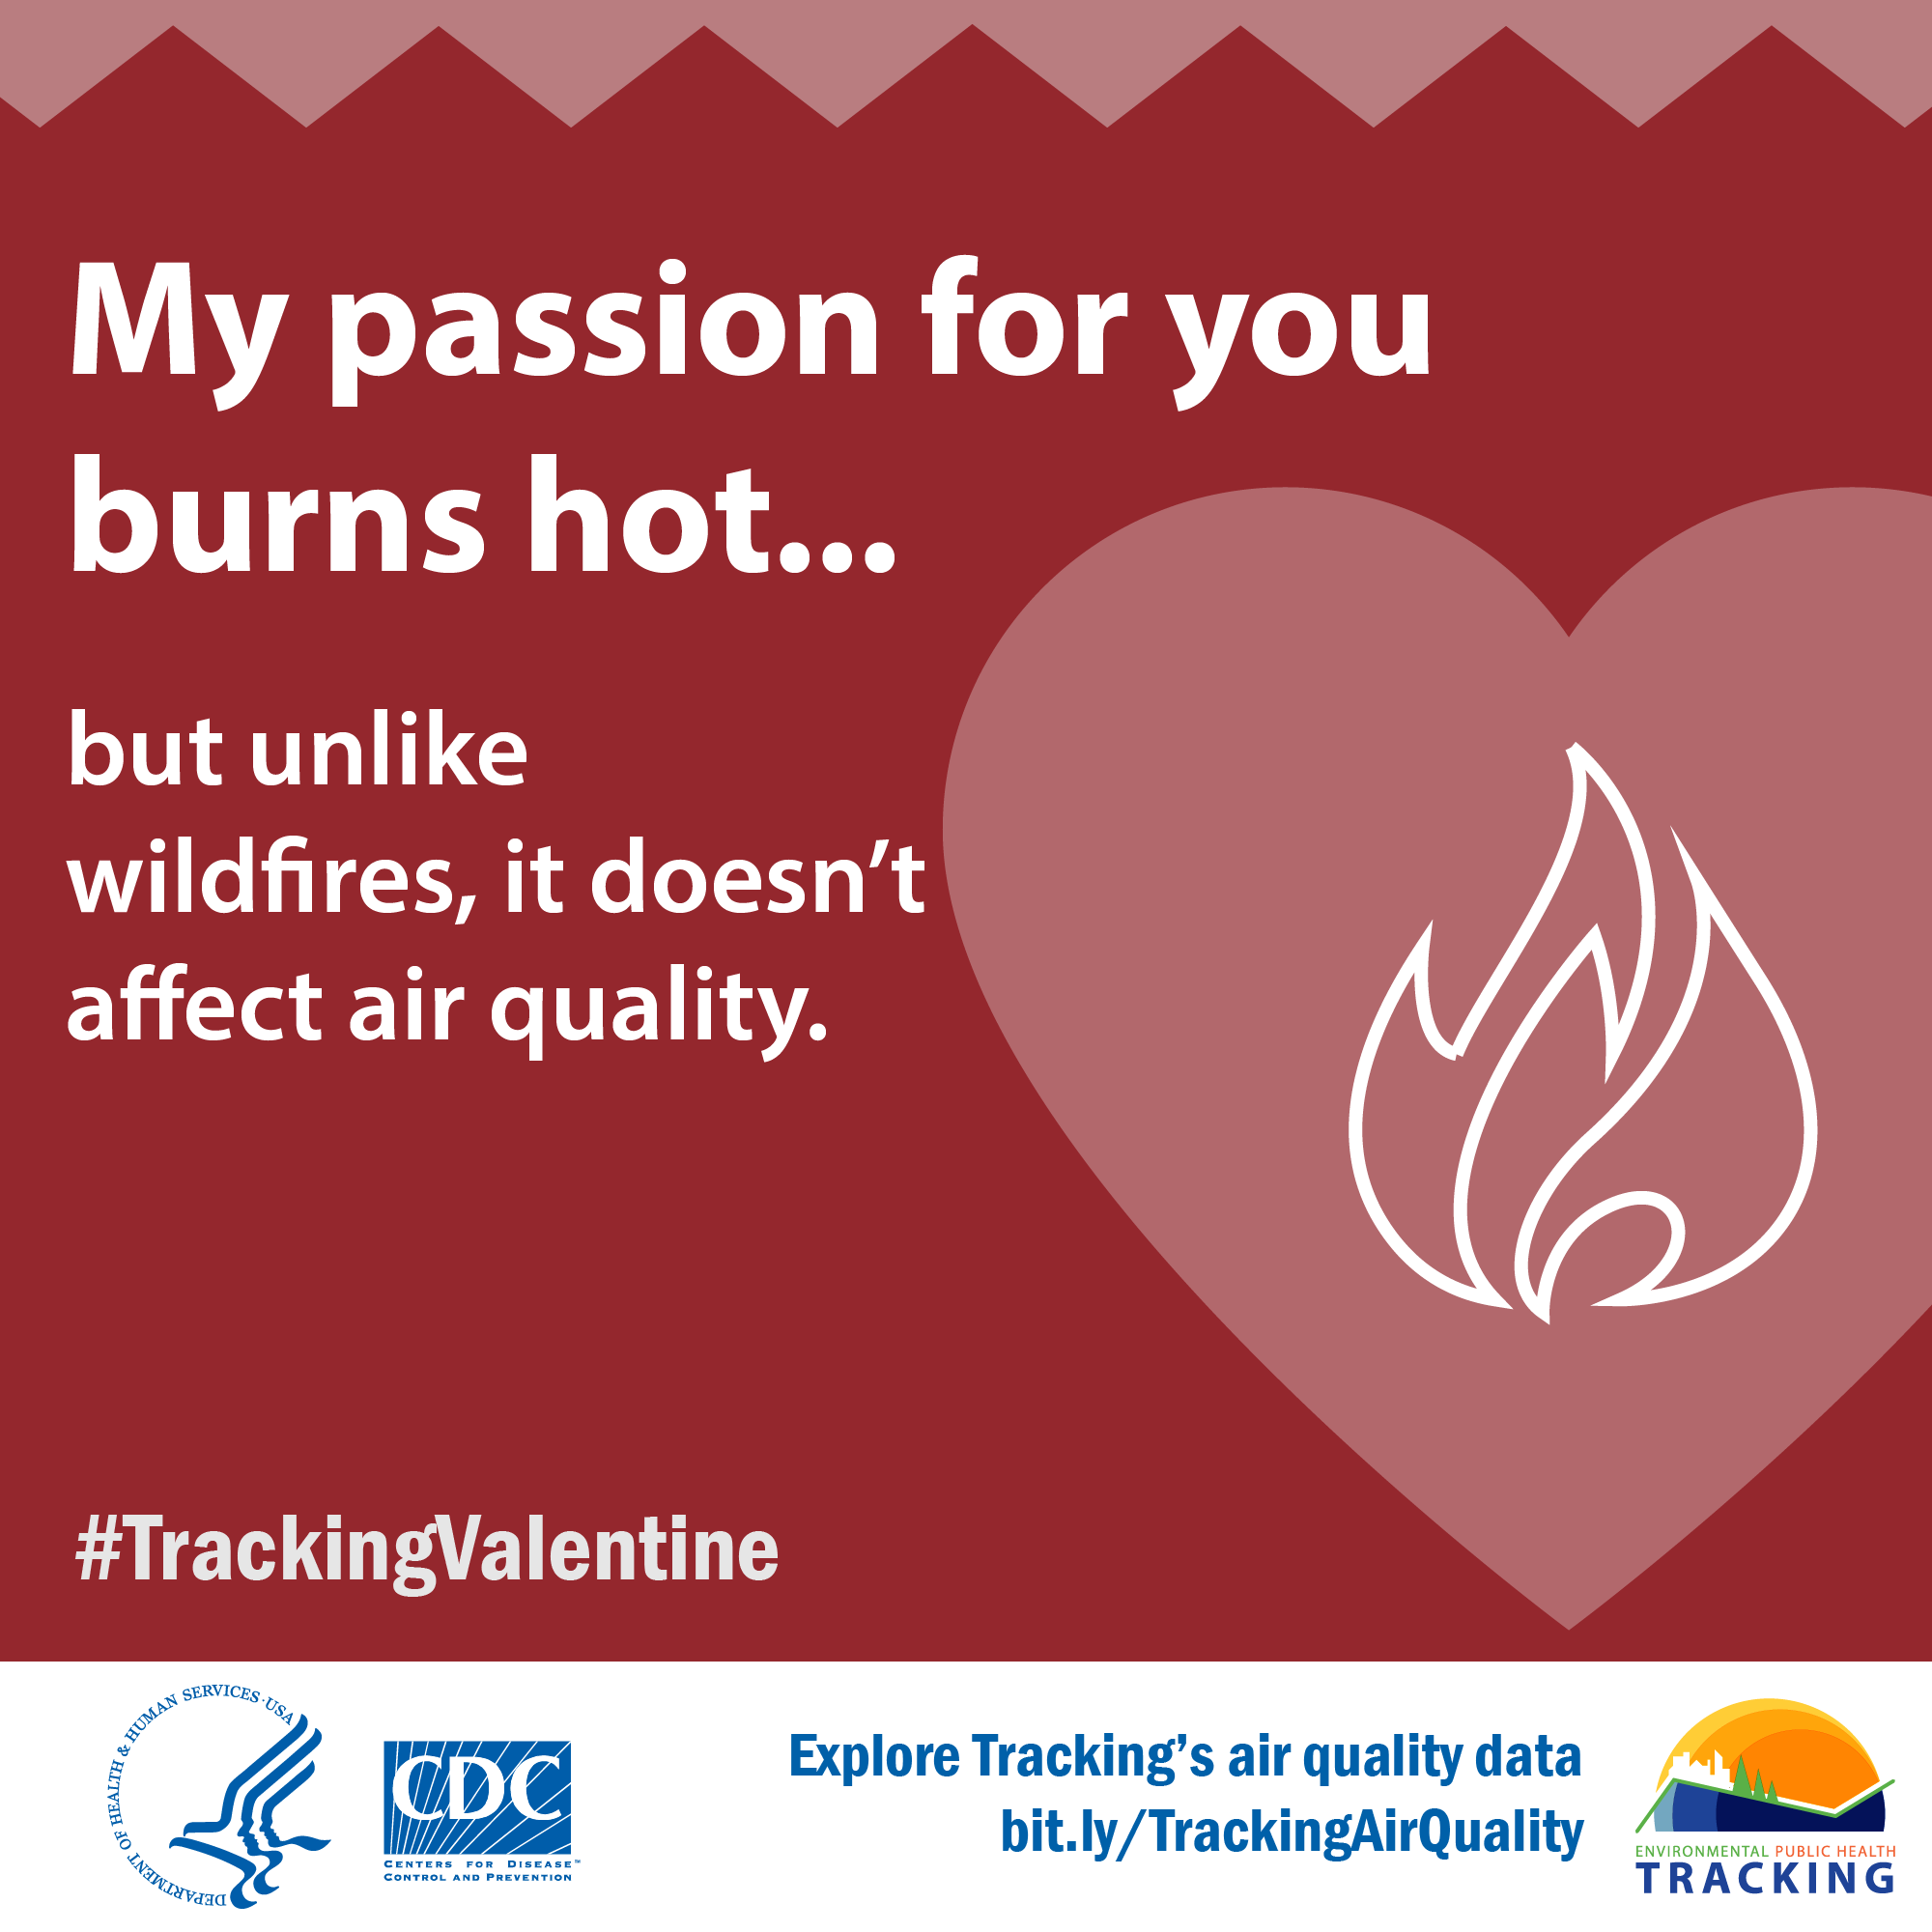 Fire icon inside red heart with text: "My passion for you burns hot...but unlike wildfires it doesn't affect air quality."